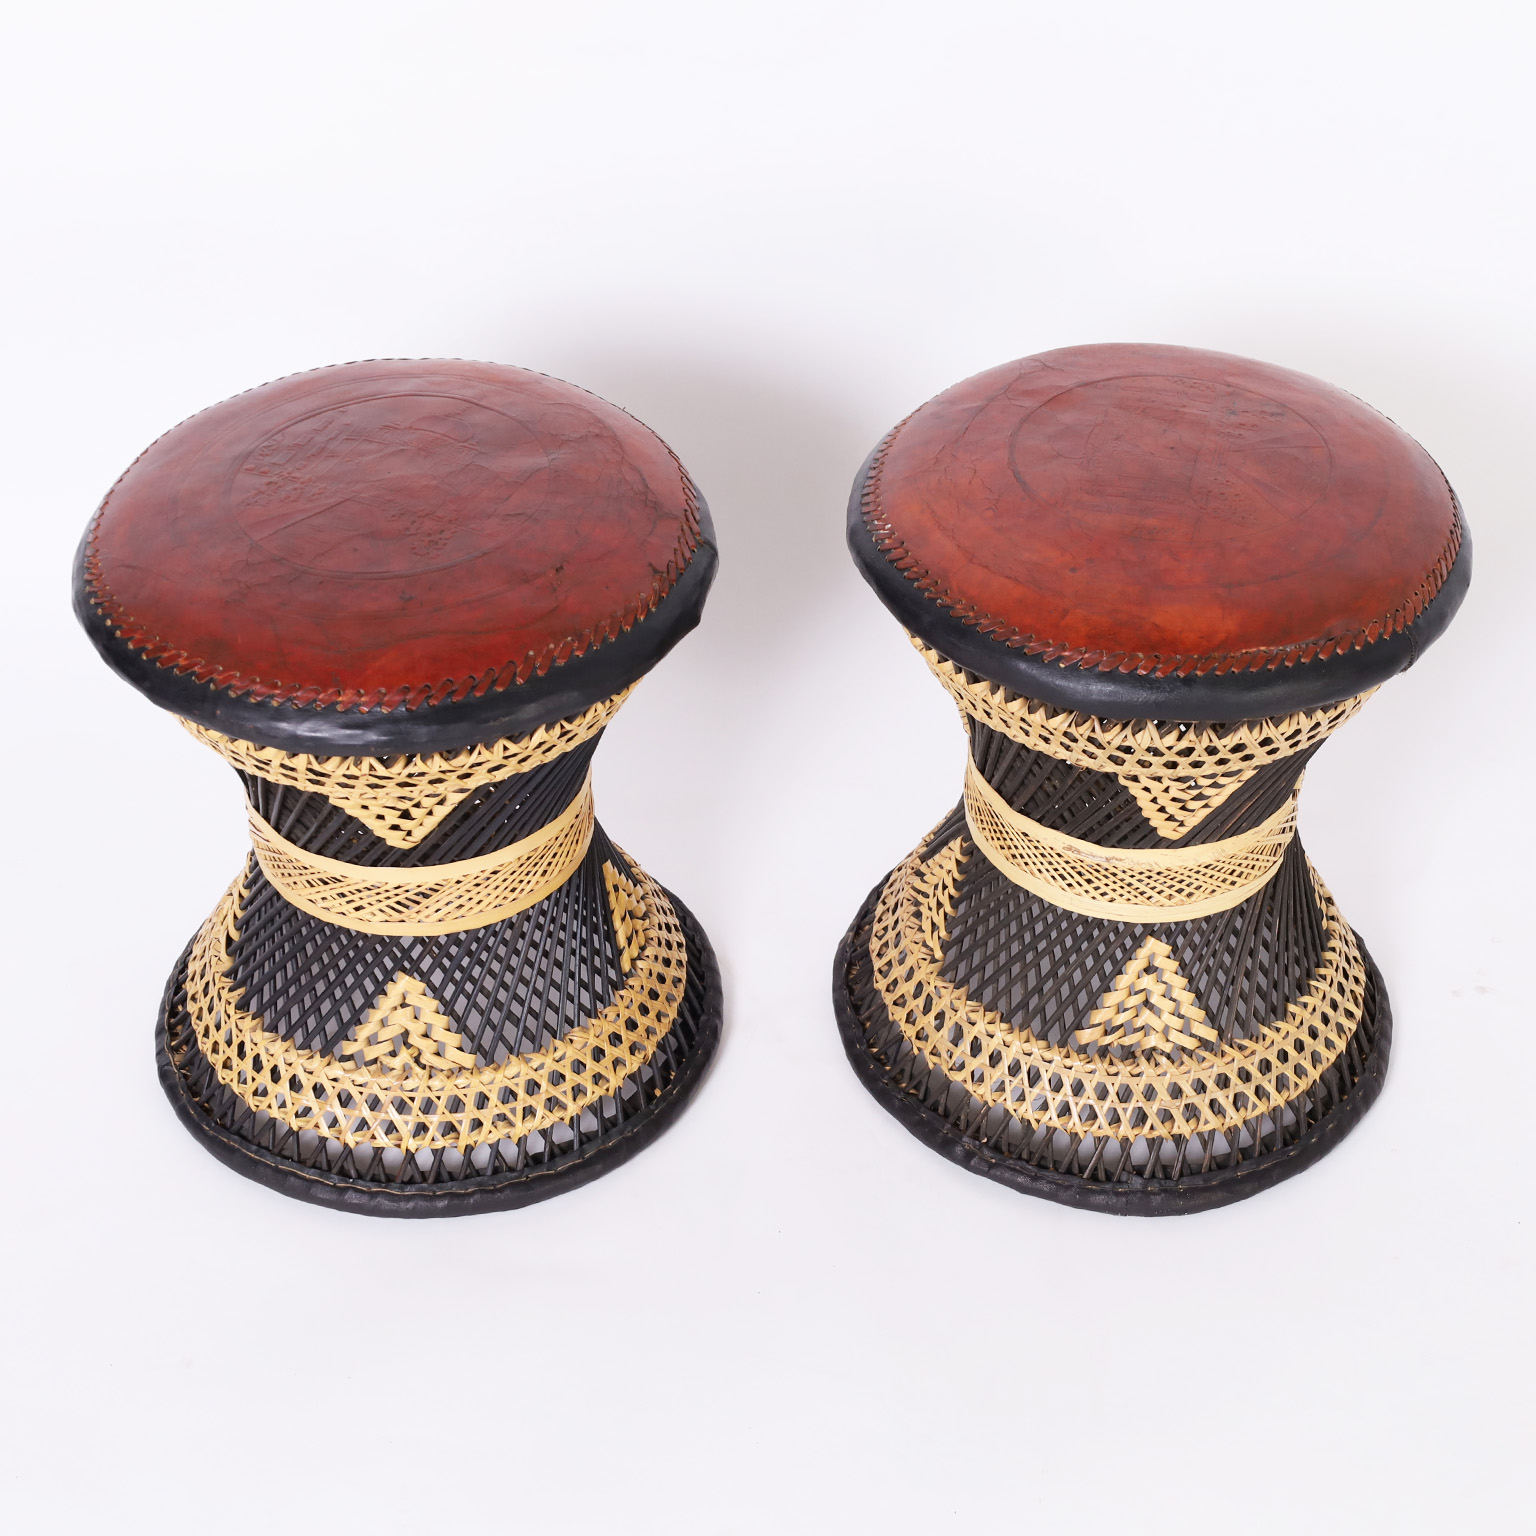 Pair of Vintage Leather and Wicker Anglo Indian Stools or Ottomans